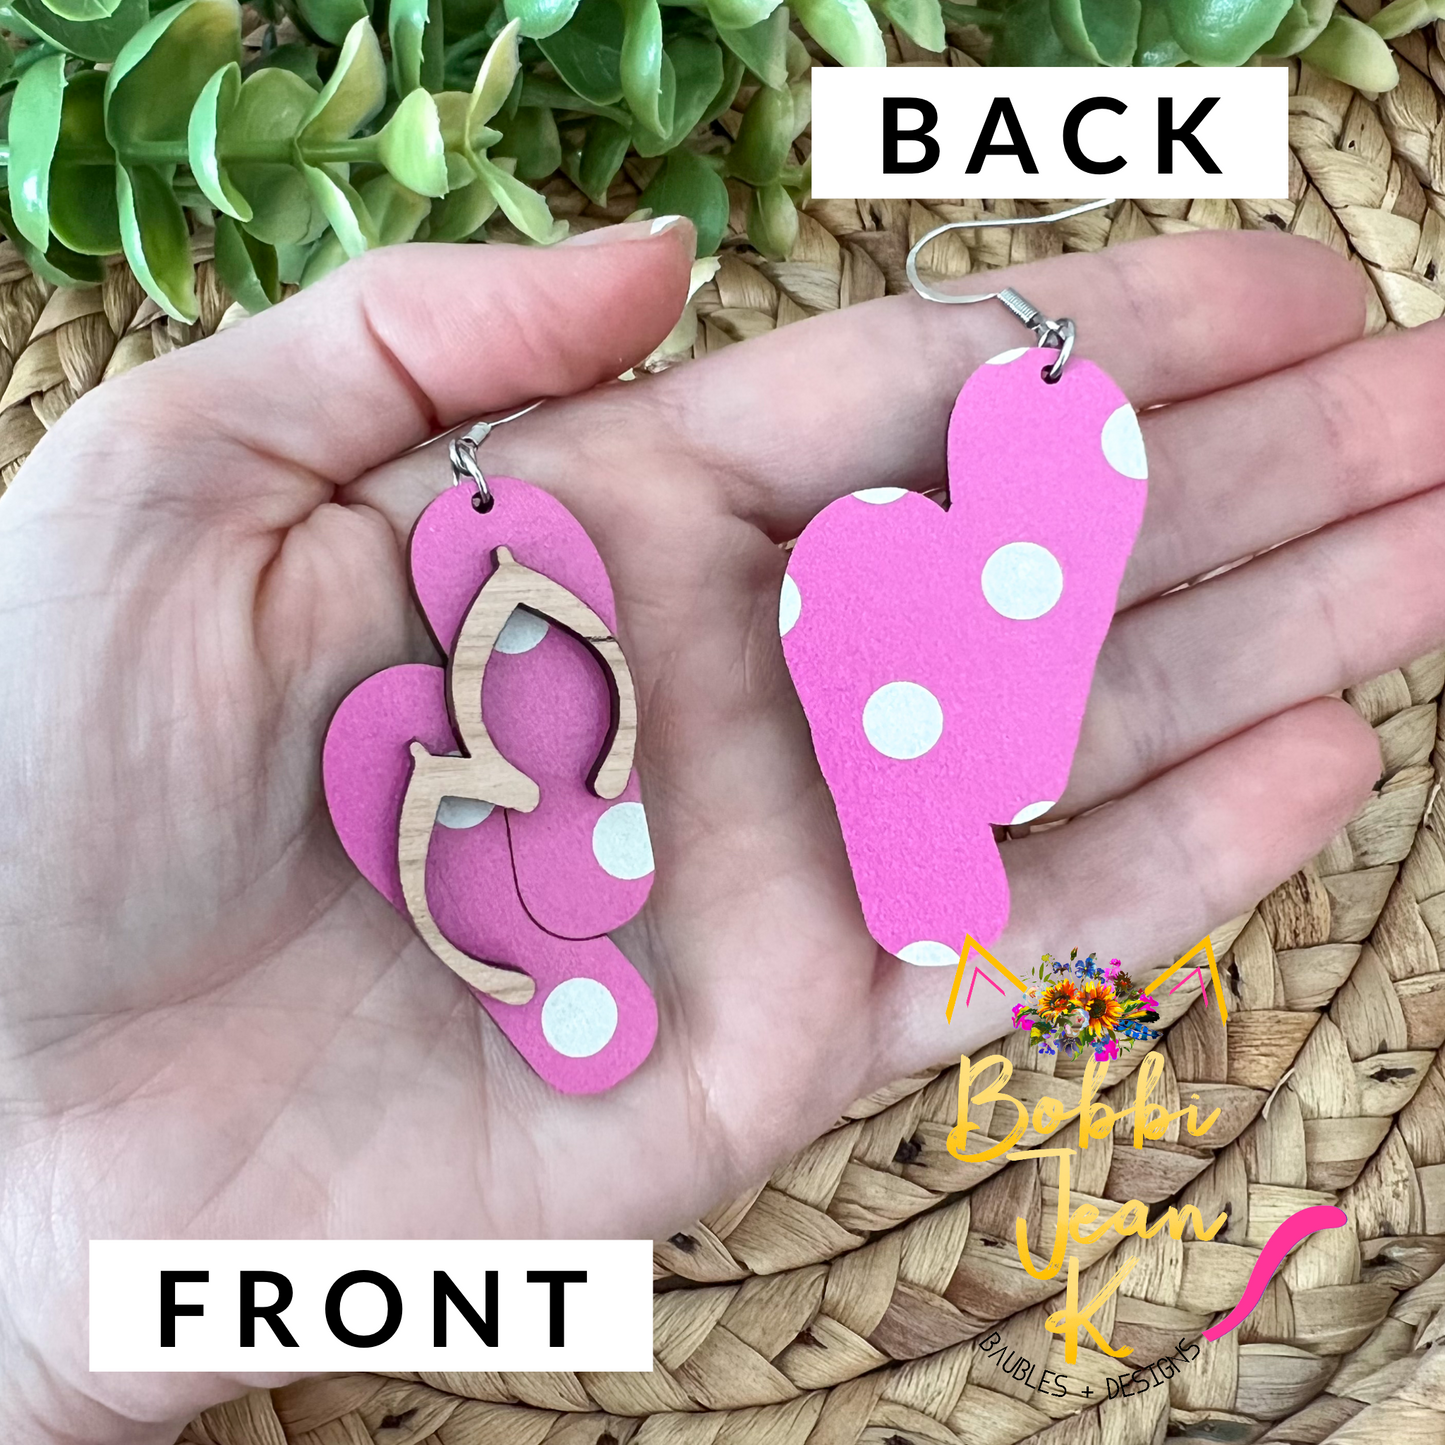 Acrylic & Wood Paired Flip Flop Earrings: Choose From 4 Prints